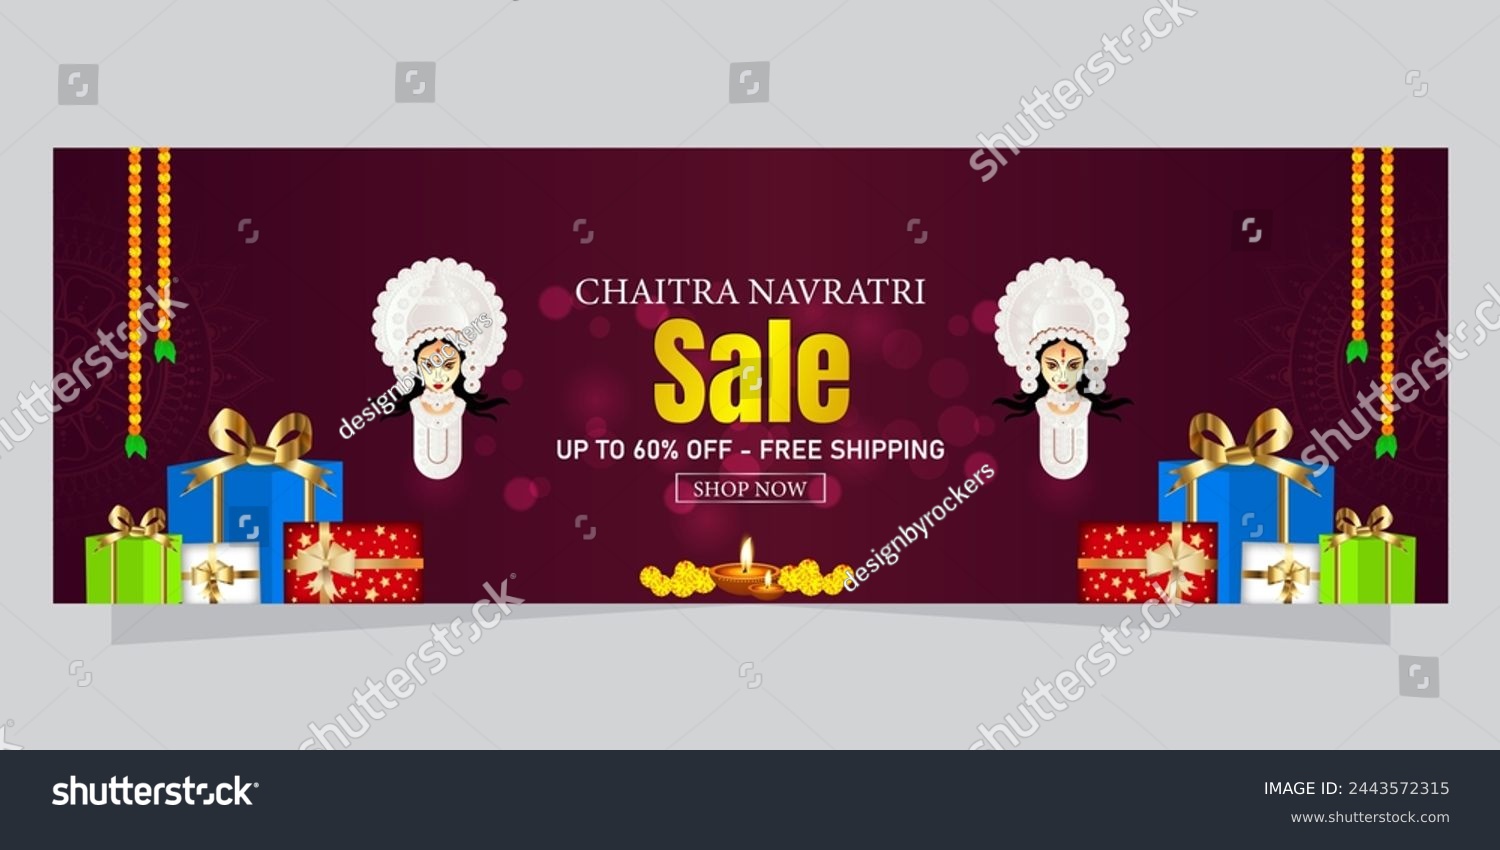 SVG of Chaitra Navratri is a Hindu festival celebrated for nine days in the Hindu lunar month of Chaitra (March-April). svg